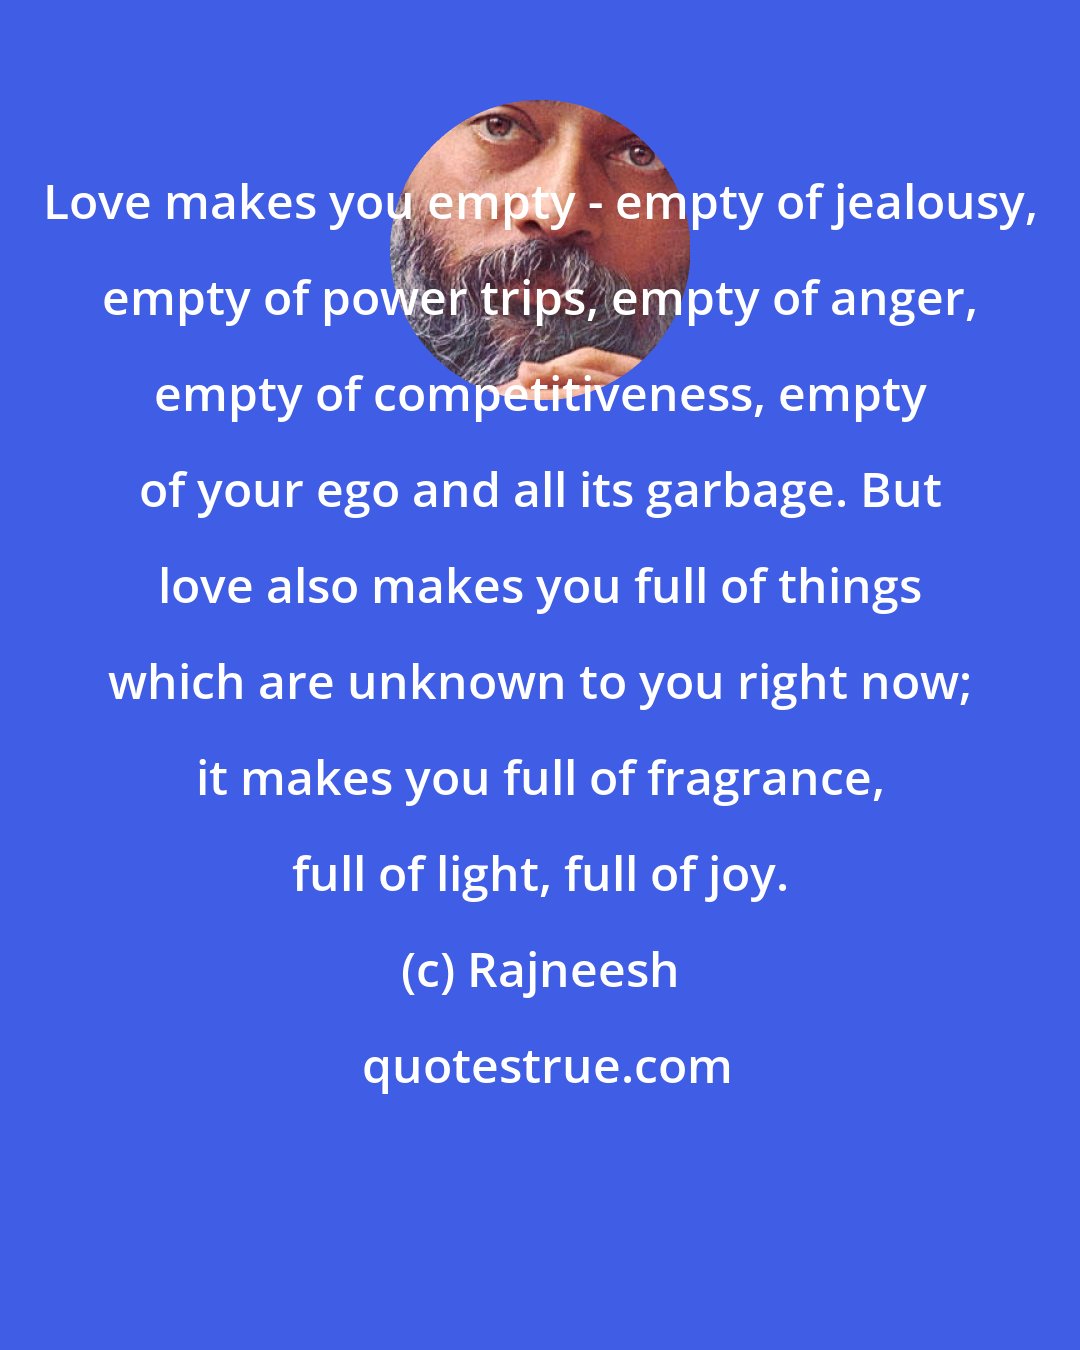 Rajneesh: Love makes you empty - empty of jealousy, empty of power trips, empty of anger, empty of competitiveness, empty of your ego and all its garbage. But love also makes you full of things which are unknown to you right now; it makes you full of fragrance, full of light, full of joy.